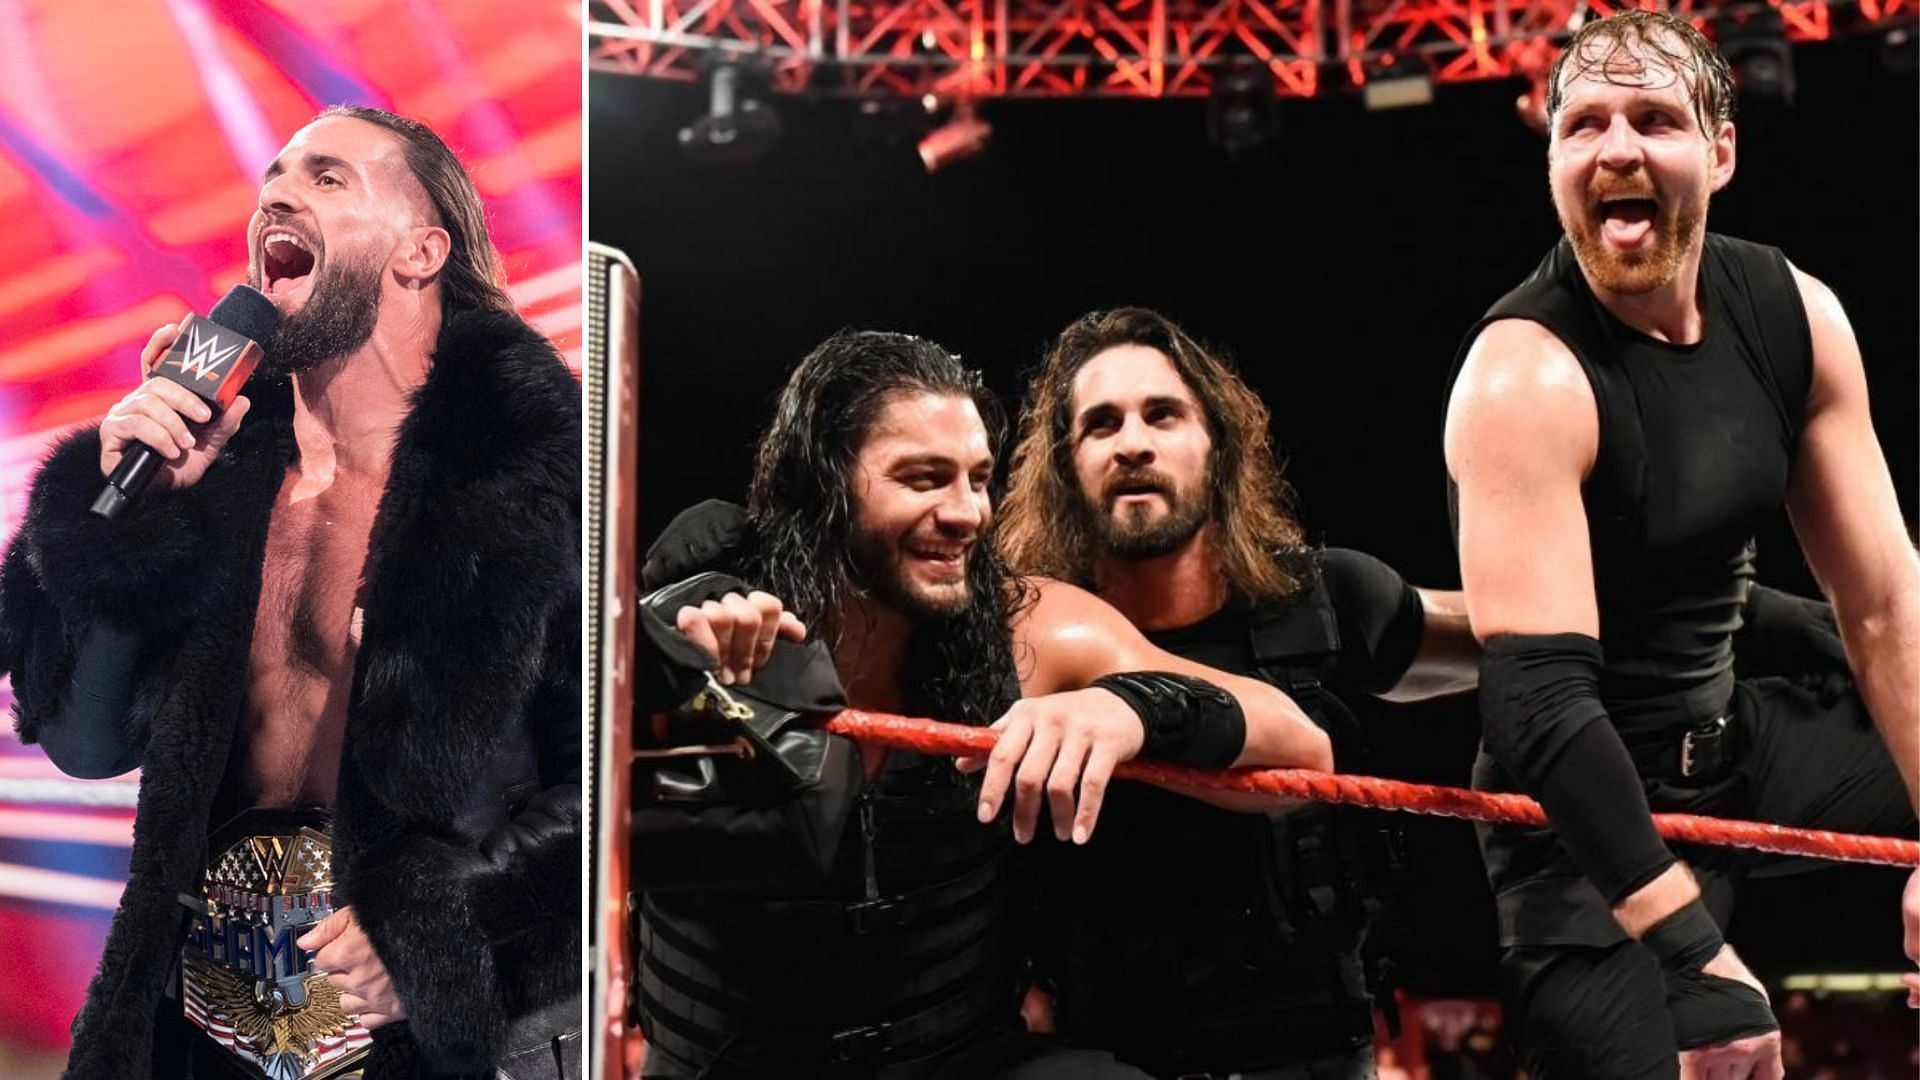 Roman Reigns, Seth Rollins and former WWE Superstar Dean Ambrose were The Shield